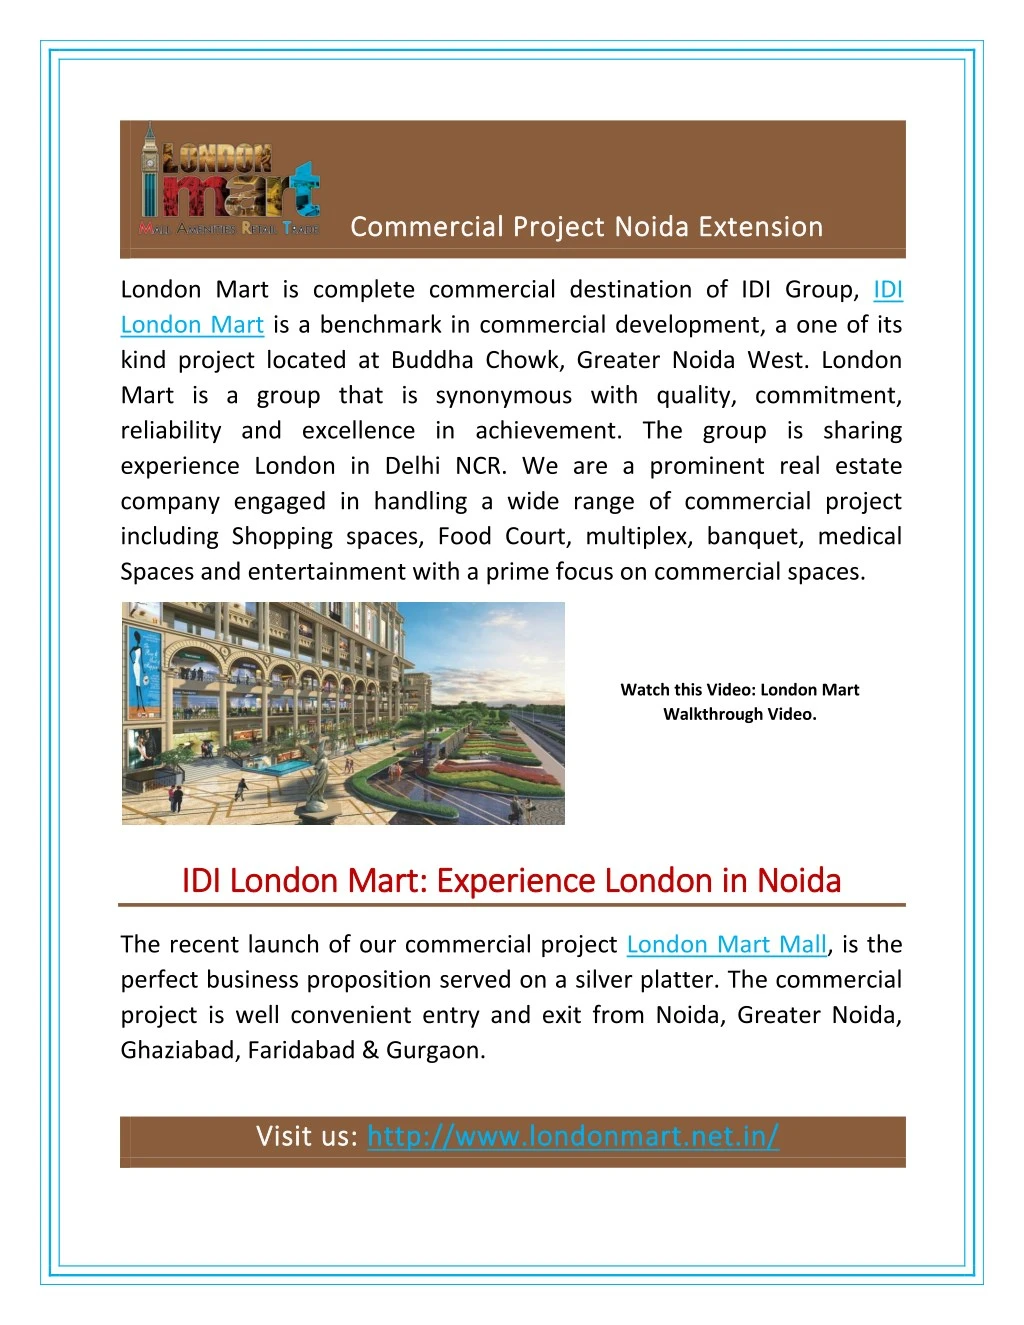 commercial project commercial project noida